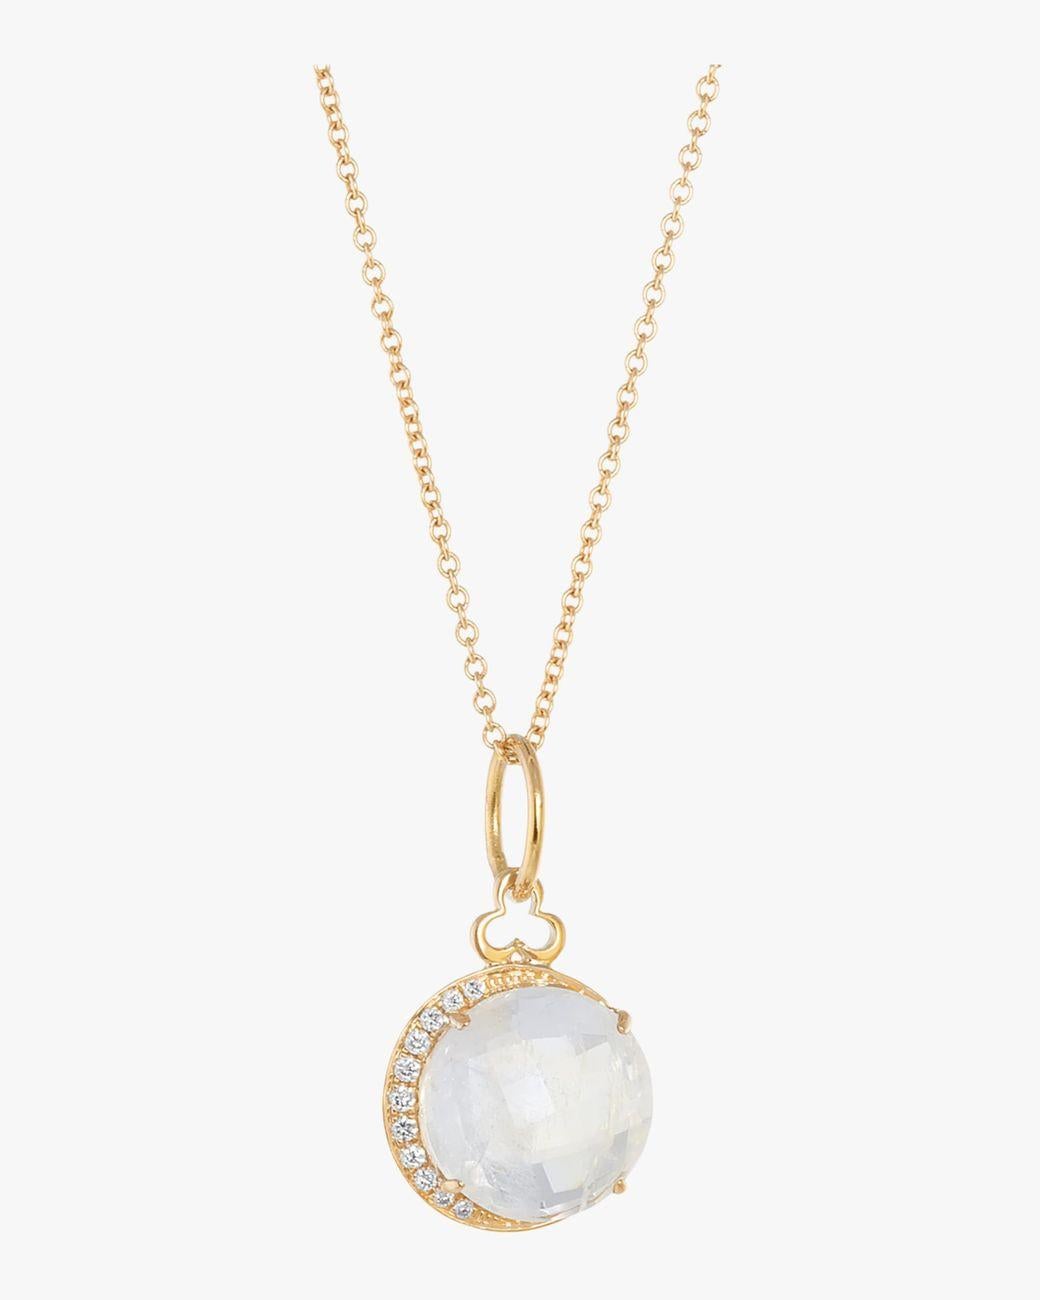 A delicate faceted moonstone charm surrounded on one side by graduated diamonds. Wear alone, layer with other necklaces or add to a locket chain. 18K Yellow Gold with a 10mm moonstone and Diamonds. The chain is 14k Yellow Gold with a length of 16”.